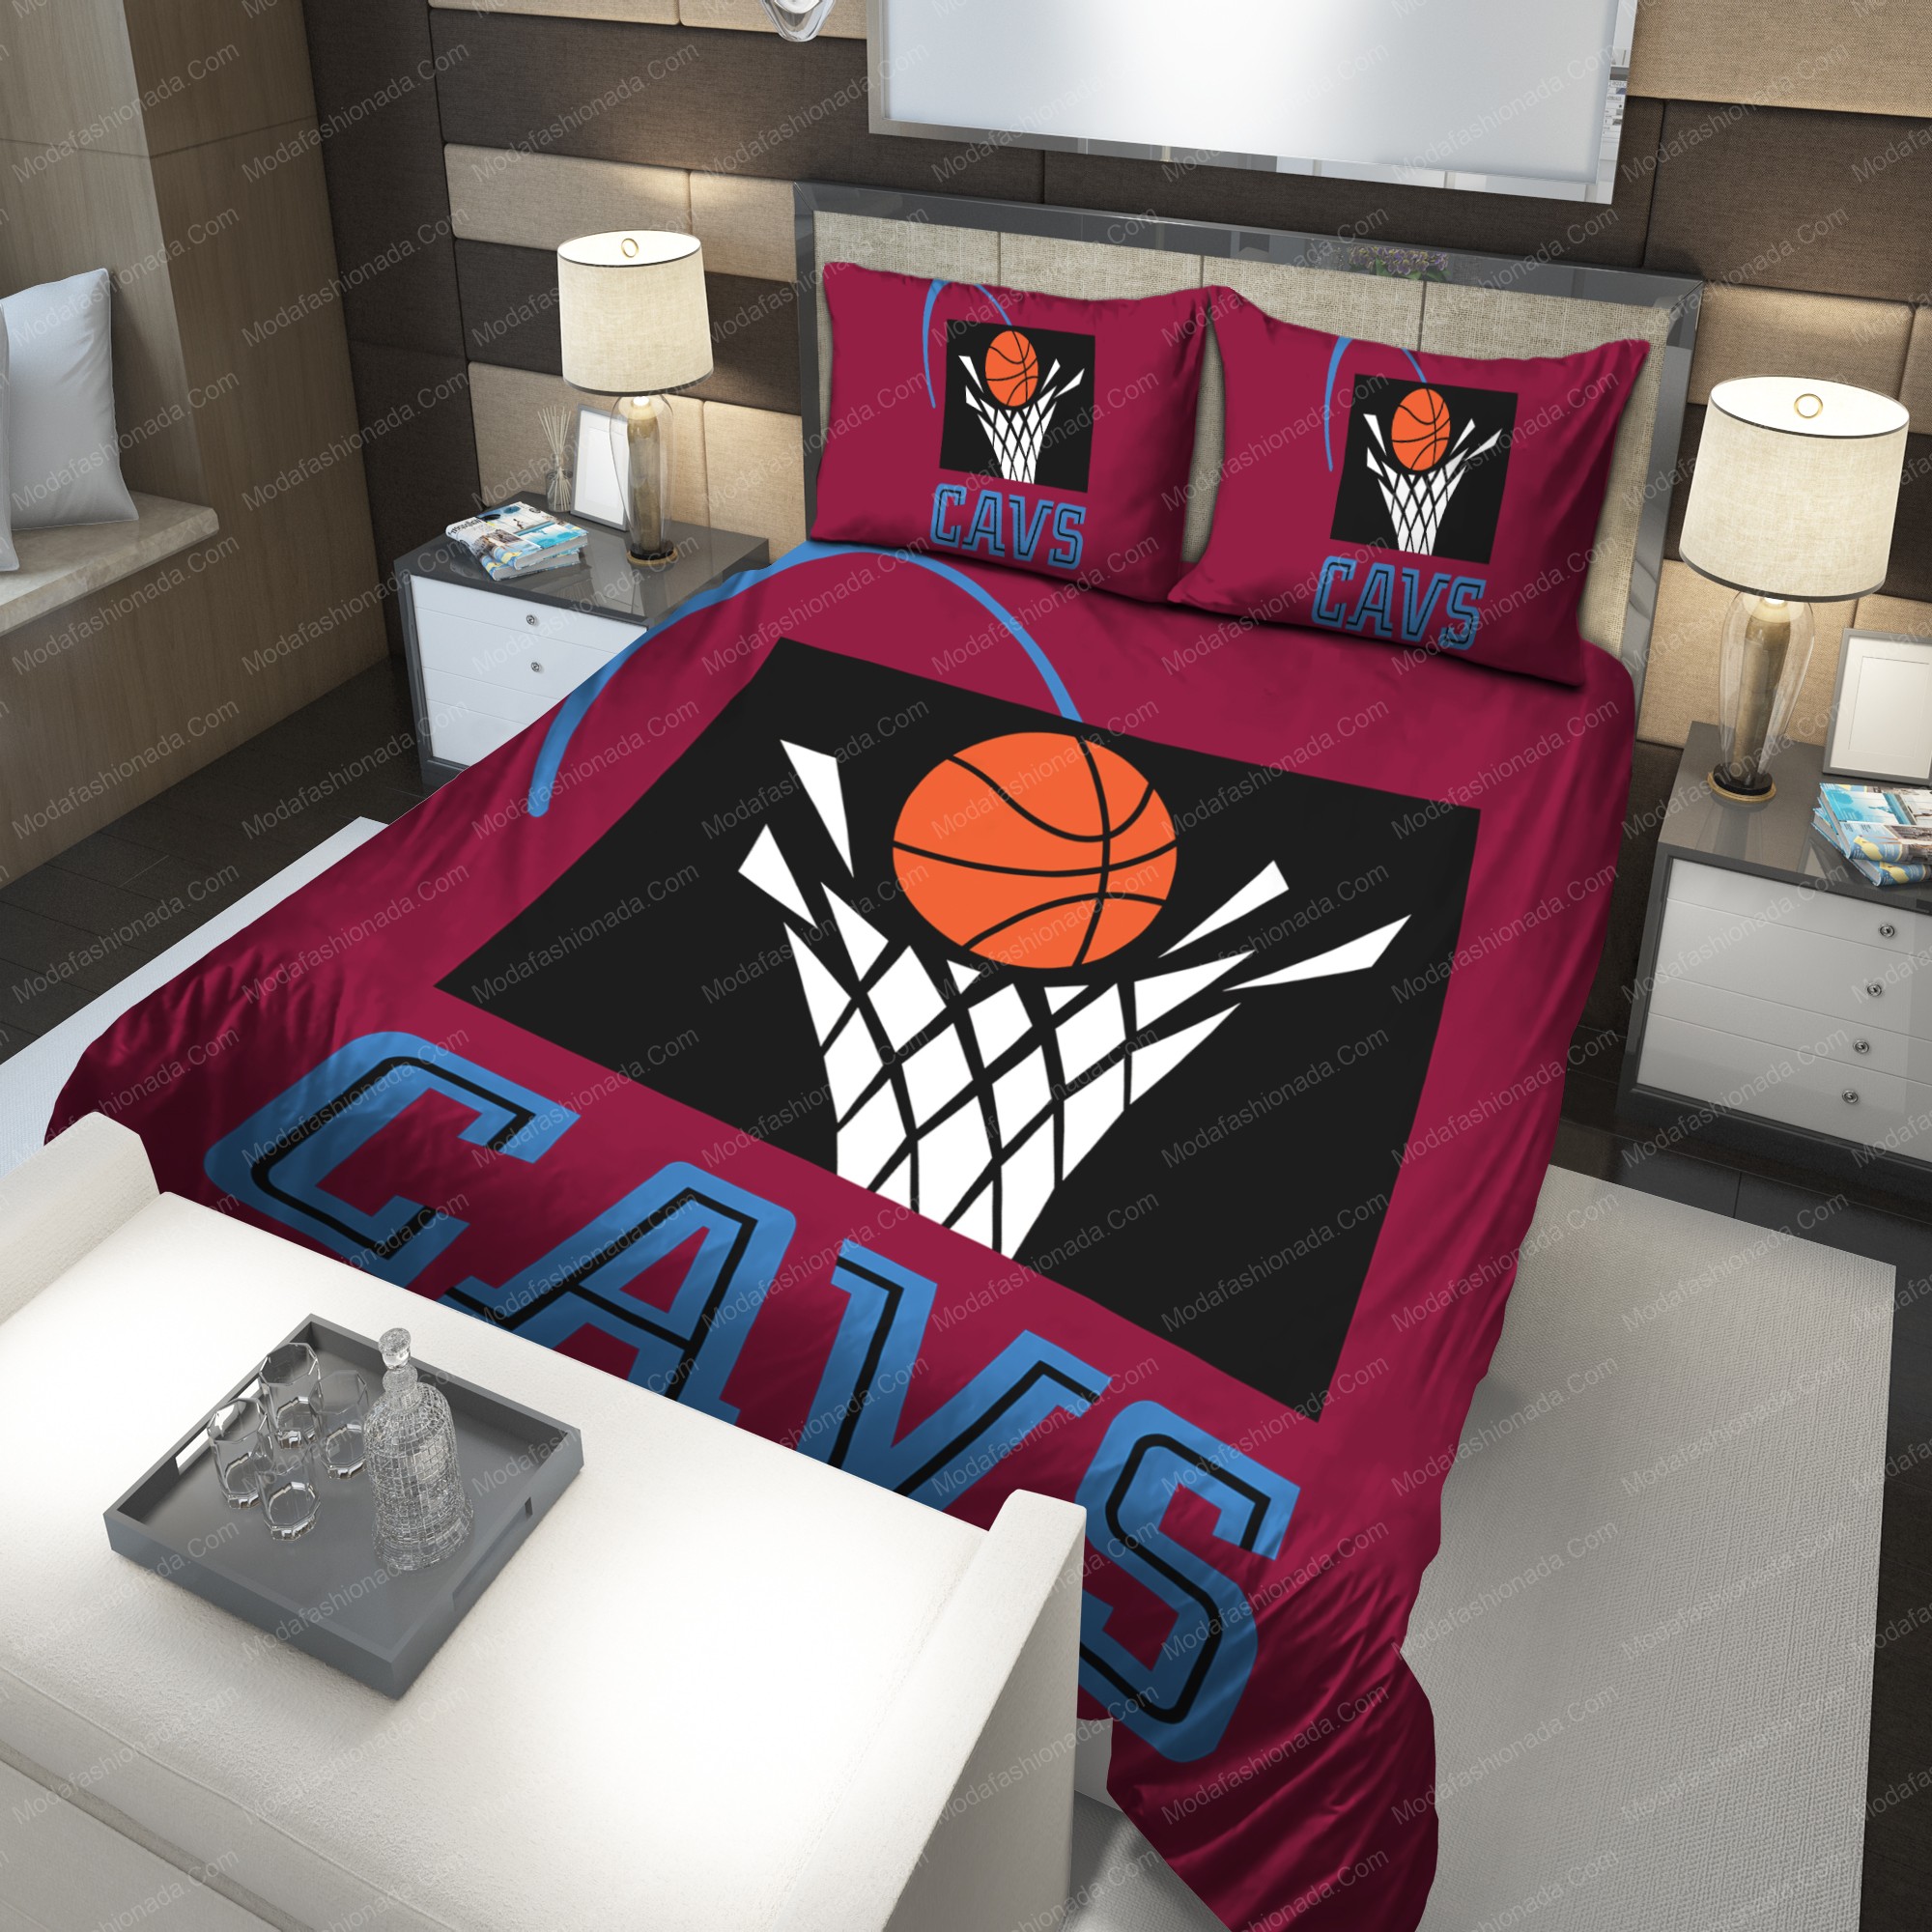 1995-2003 Cleveland Cavaliers Nba 214 Logo Type 1031 Bedding Sets Sporty Bedroom Home Decor